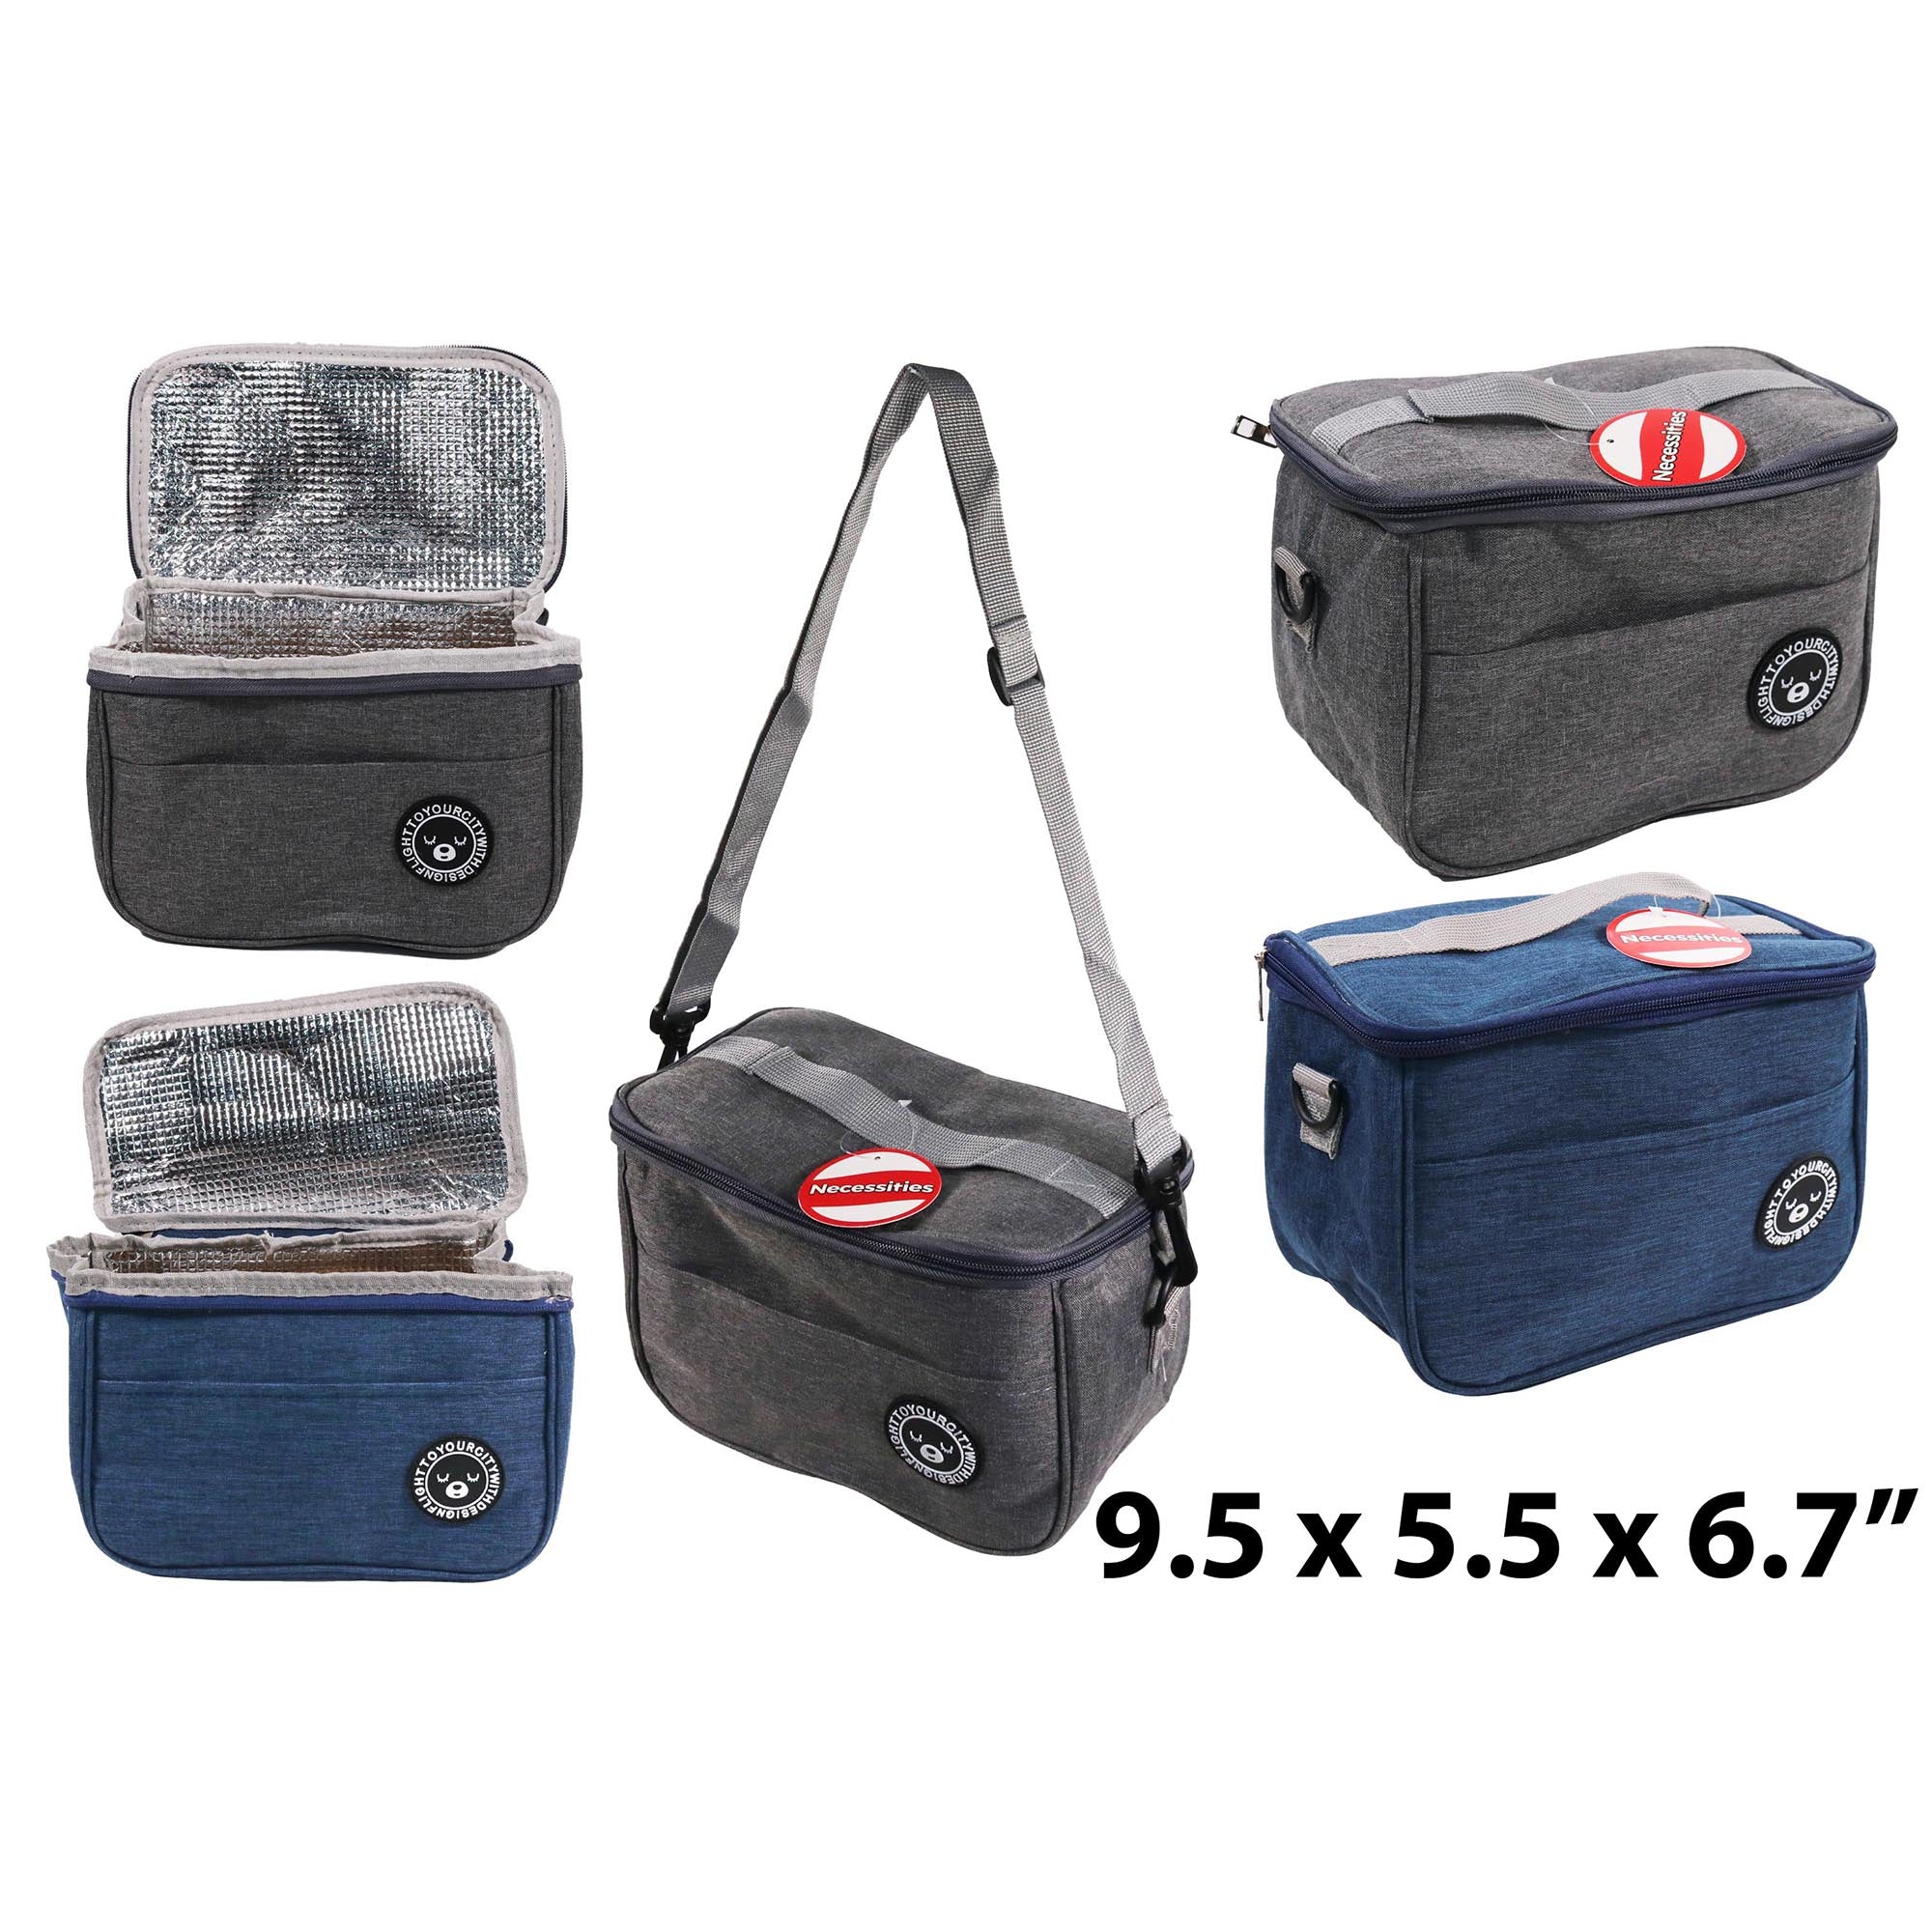 Cooler Bag Thermal Insulation 9.5x5.5x6.7in